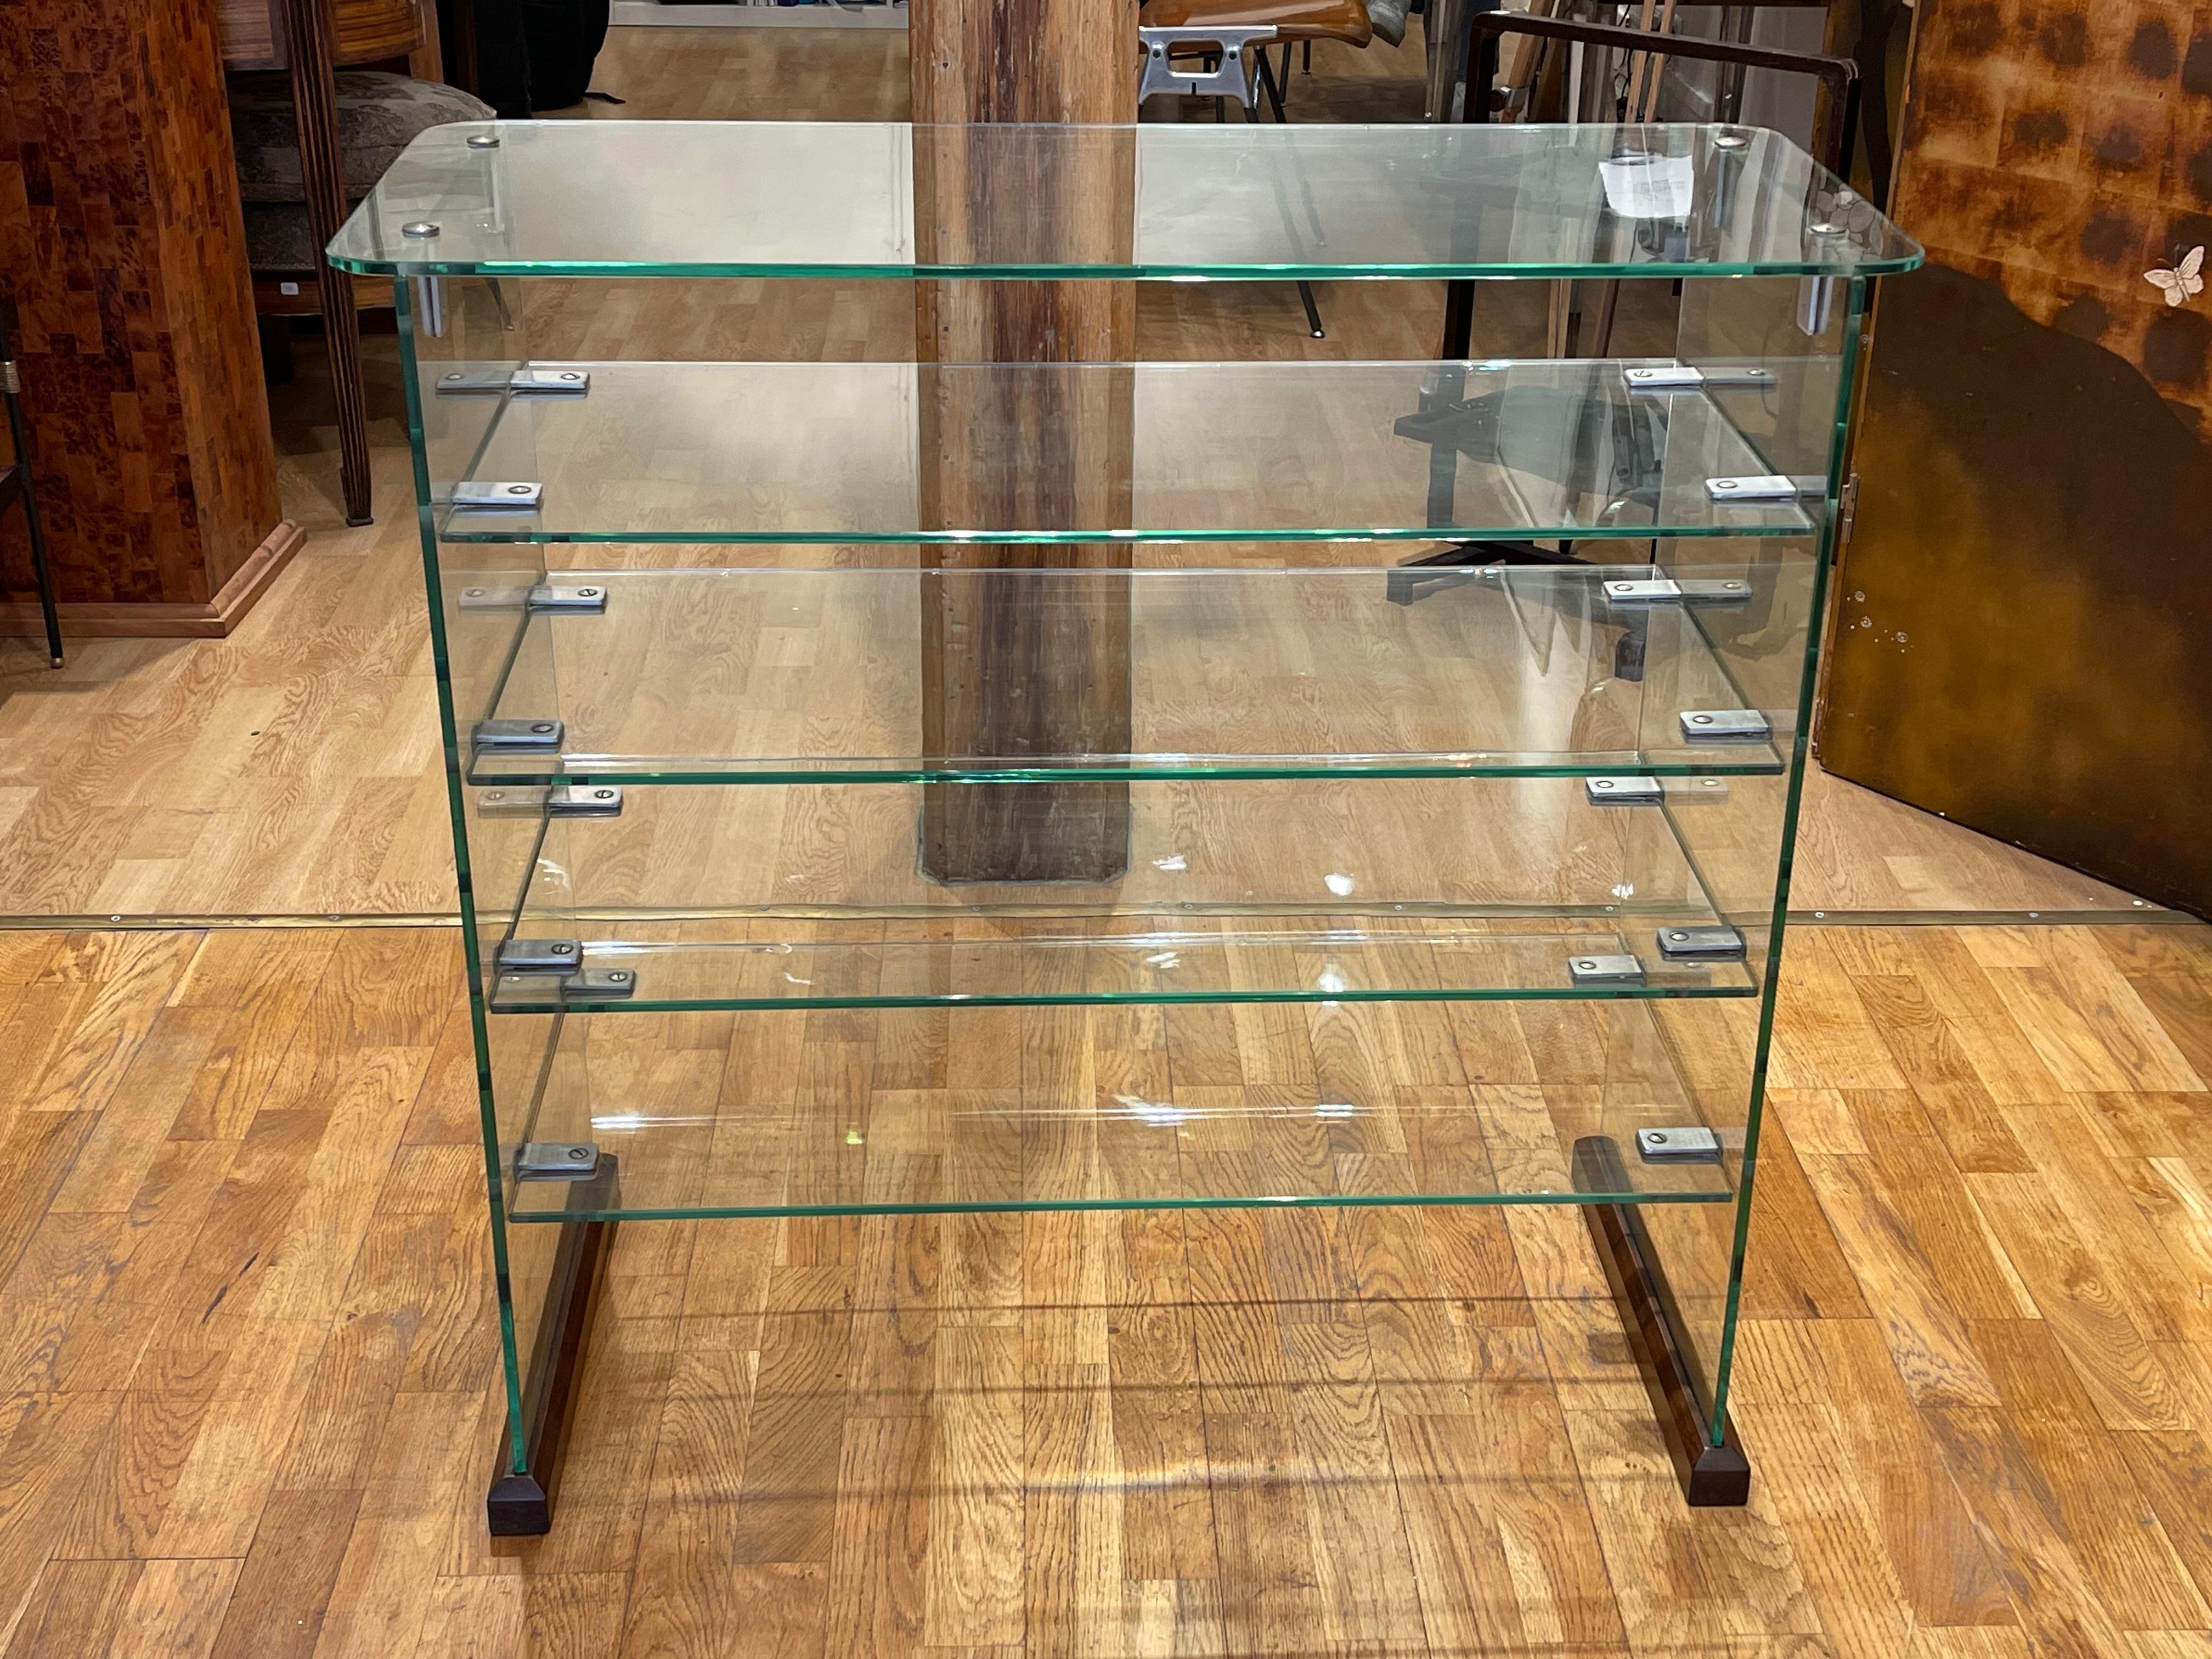 Excepptionnal brass and glass shelf, featuring five supported wooden shelves held by two glass blades at the ends, all securely connected and fixed by brass screws.

The glass is engraved «Vitrex»

Originally designed for the Ventrocoke offices in